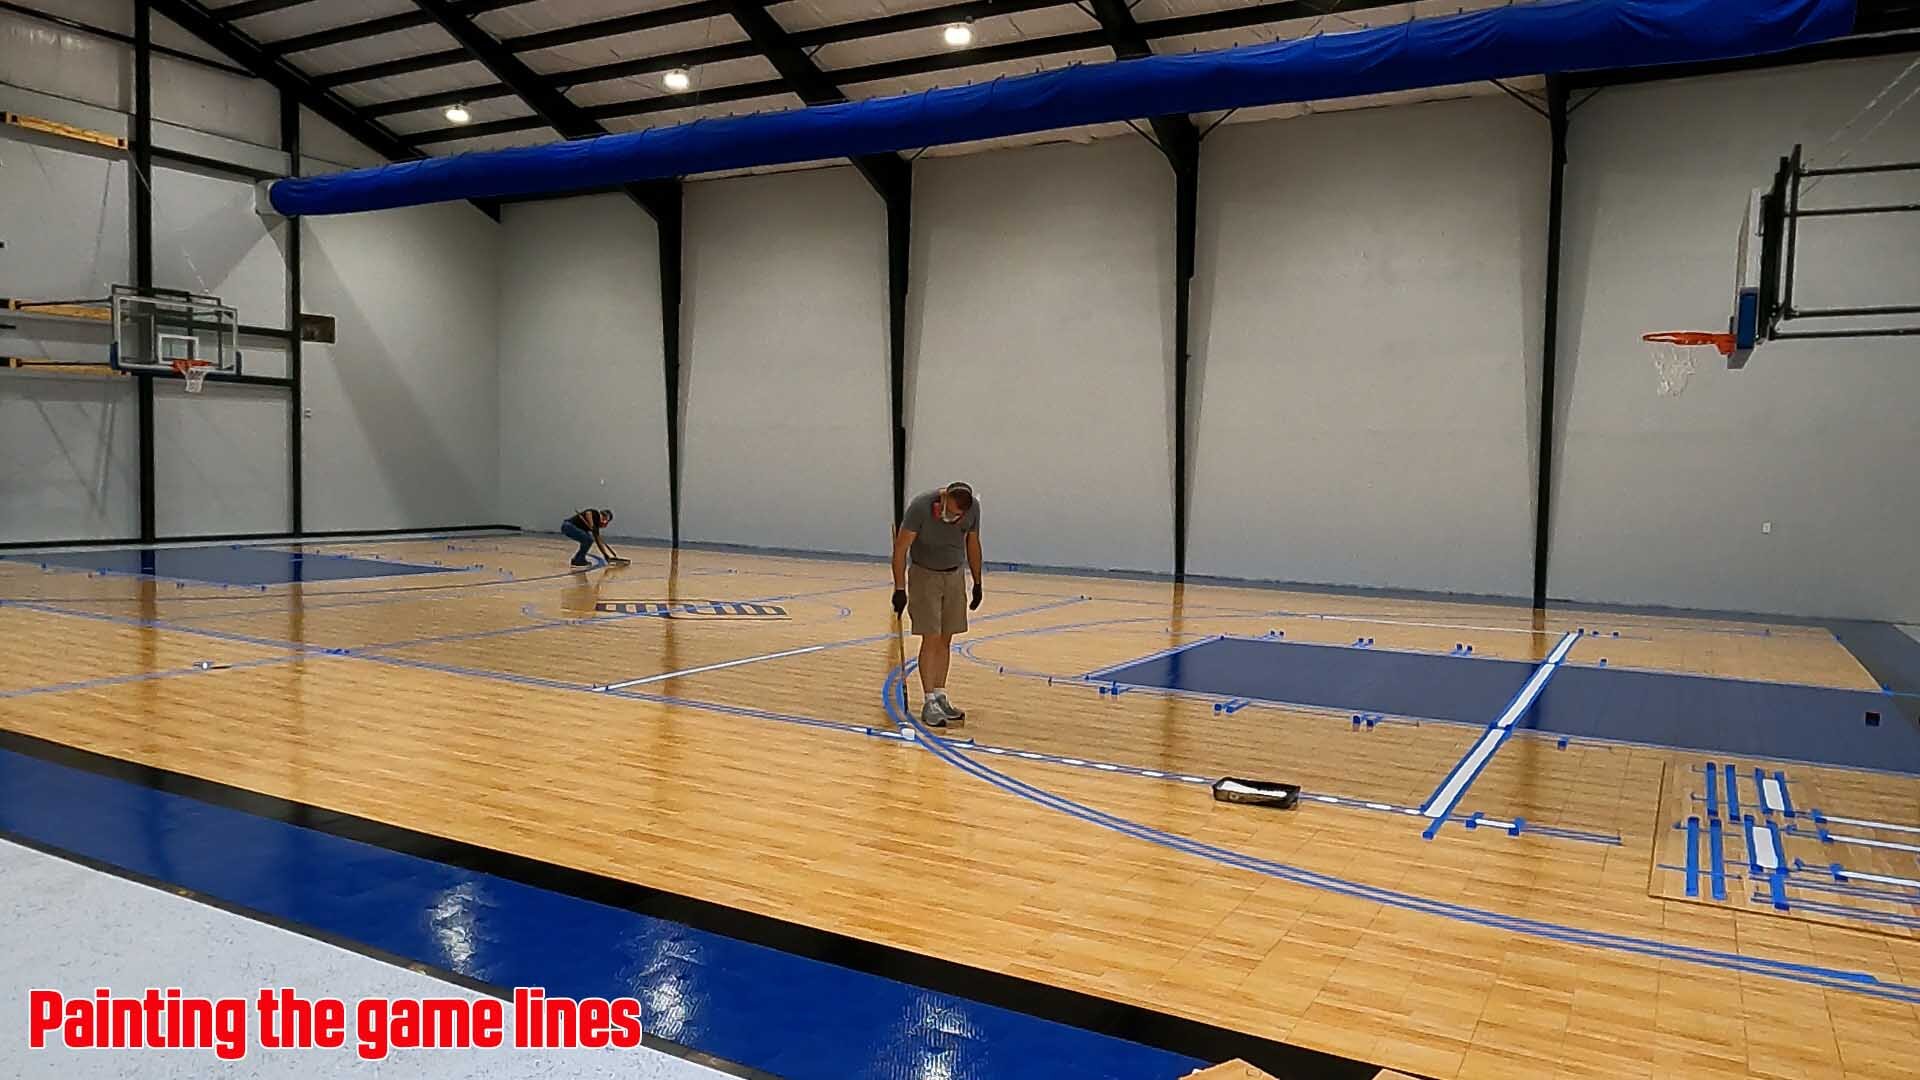 Painting game lines on a gym floor